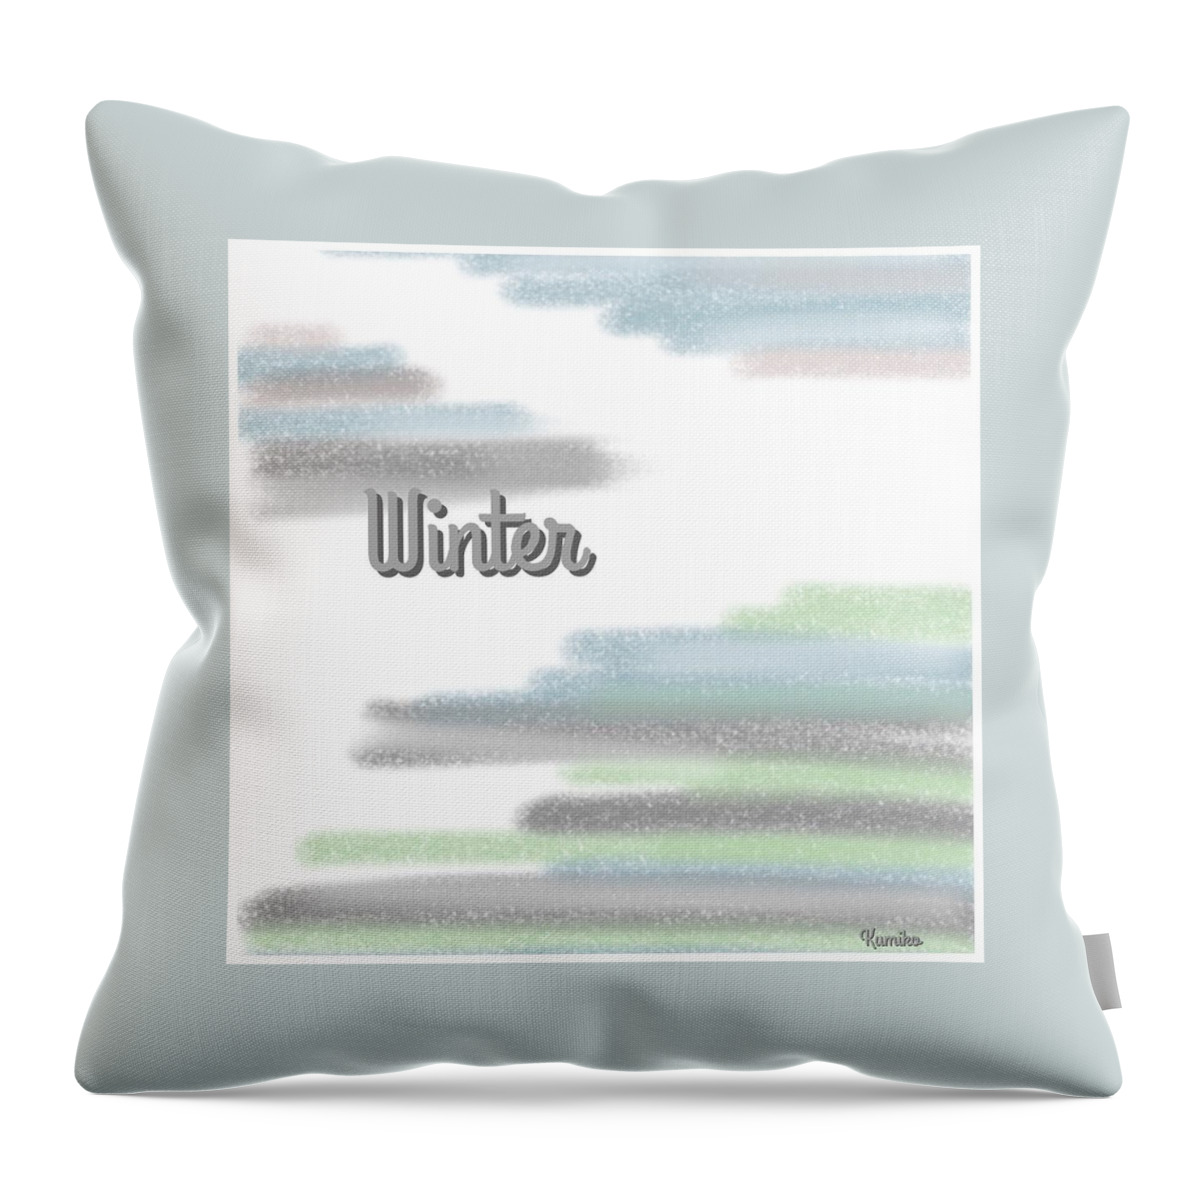 Winter Throw Pillow featuring the painting Winter by Kumiko Izumi